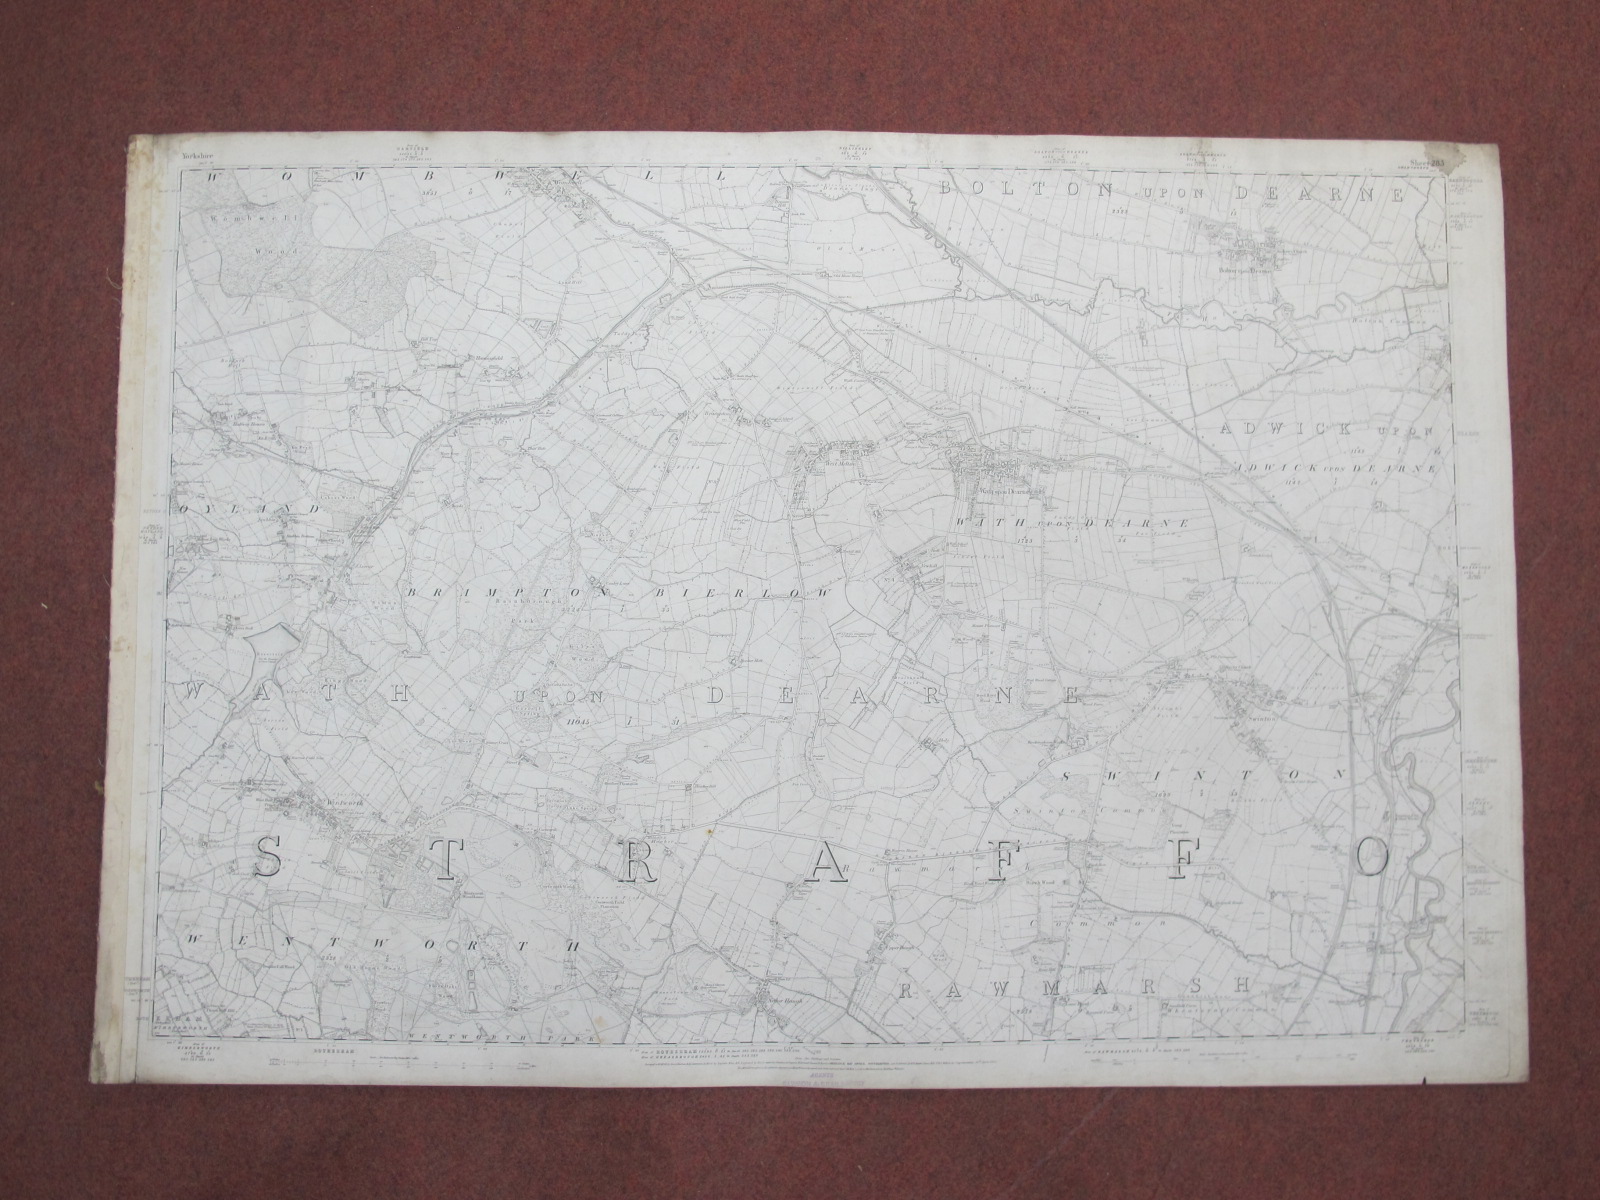 West Riding Yorkshire Maps, Rotherham and area - some dates noted 1902, 1903, 1922, 1935, various - Image 8 of 11